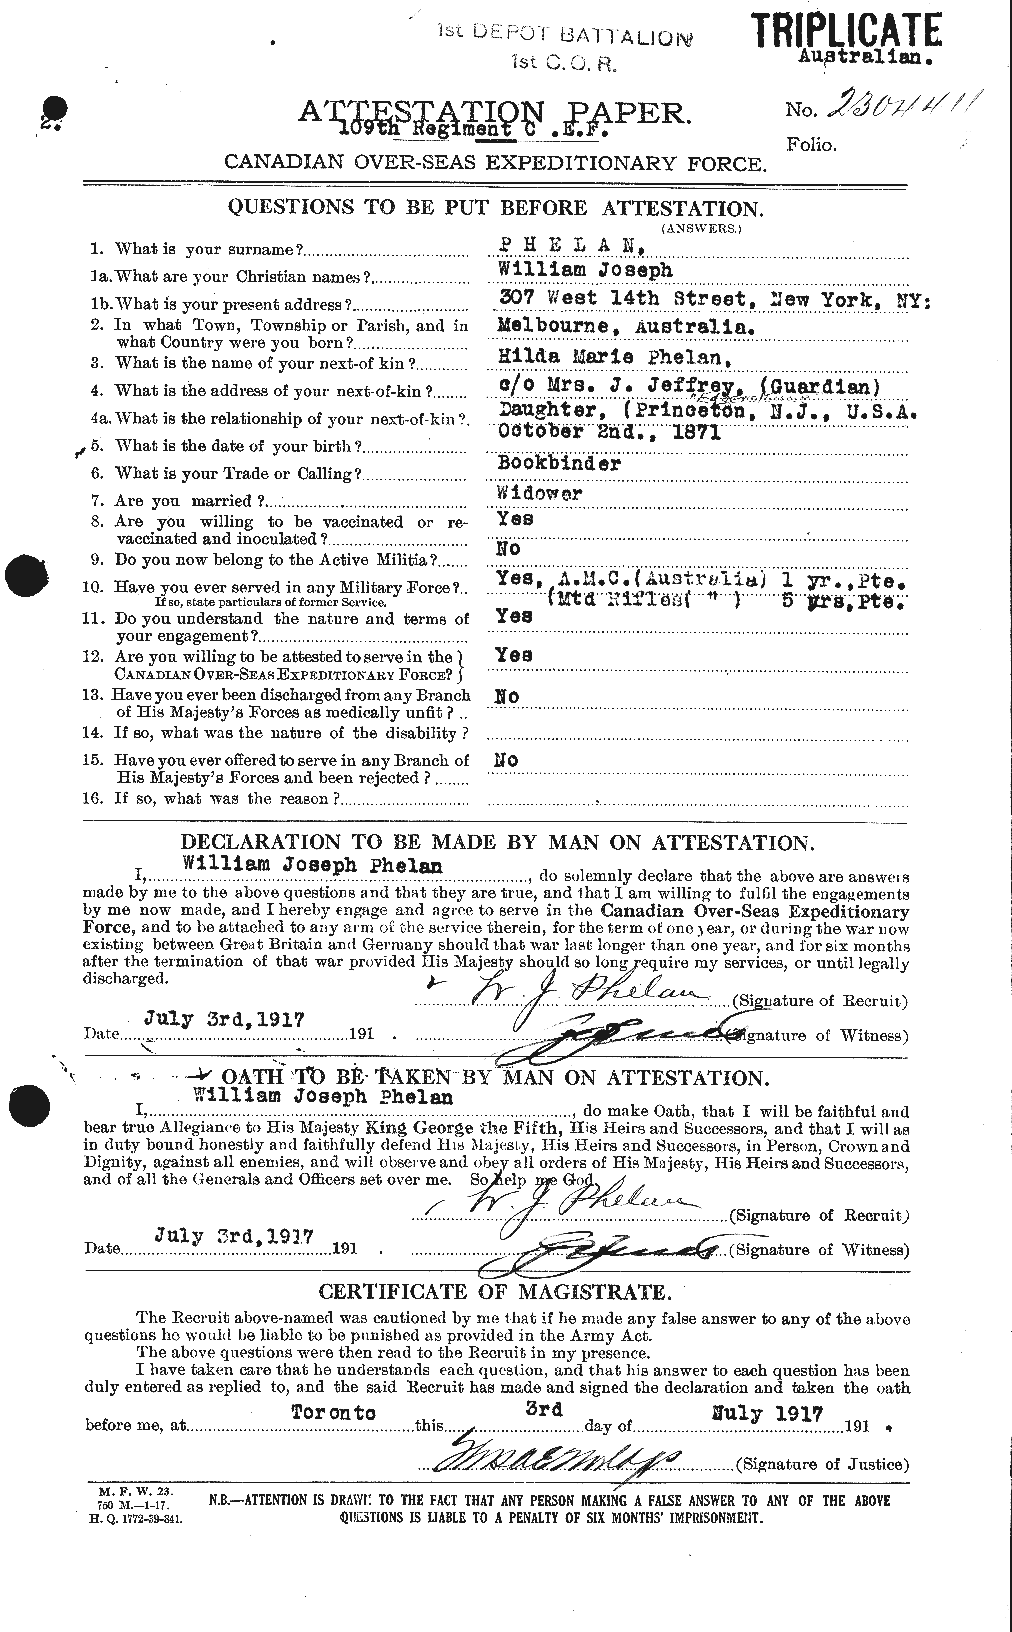 Personnel Records of the First World War - CEF 576976a